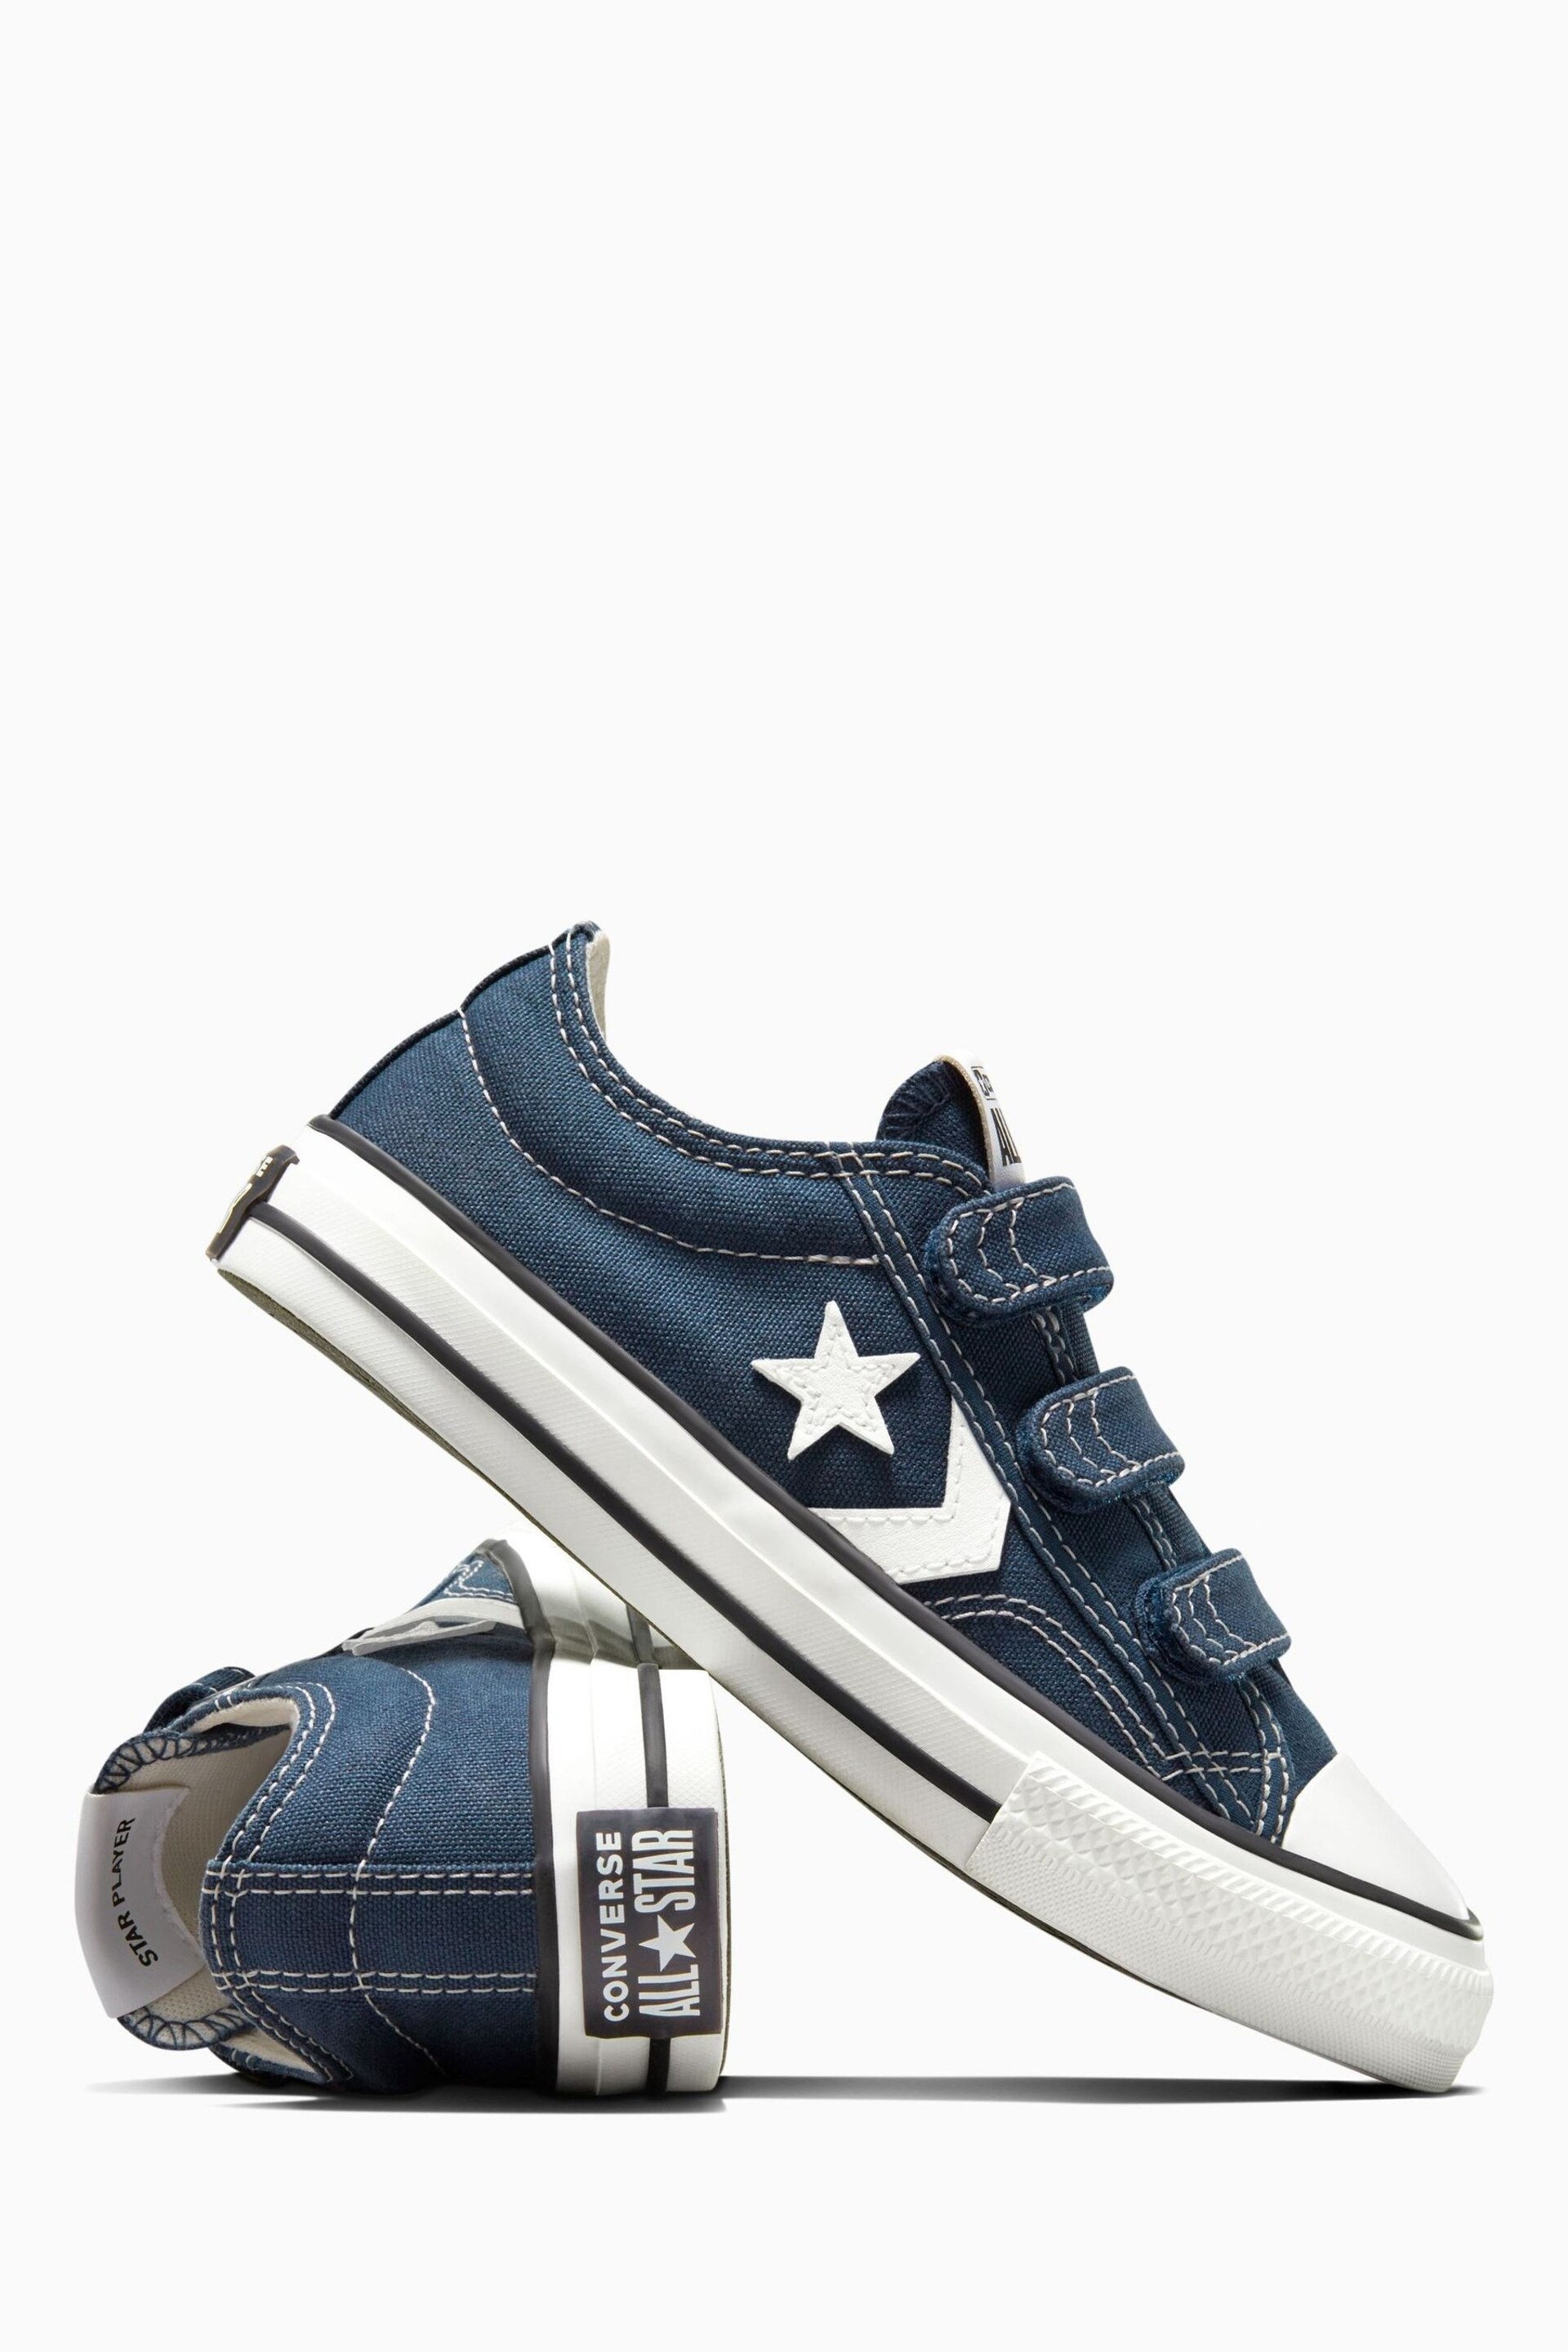 Converse Blue Junior Star Player 76 3V Easy On Trainers - Image 8 of 11